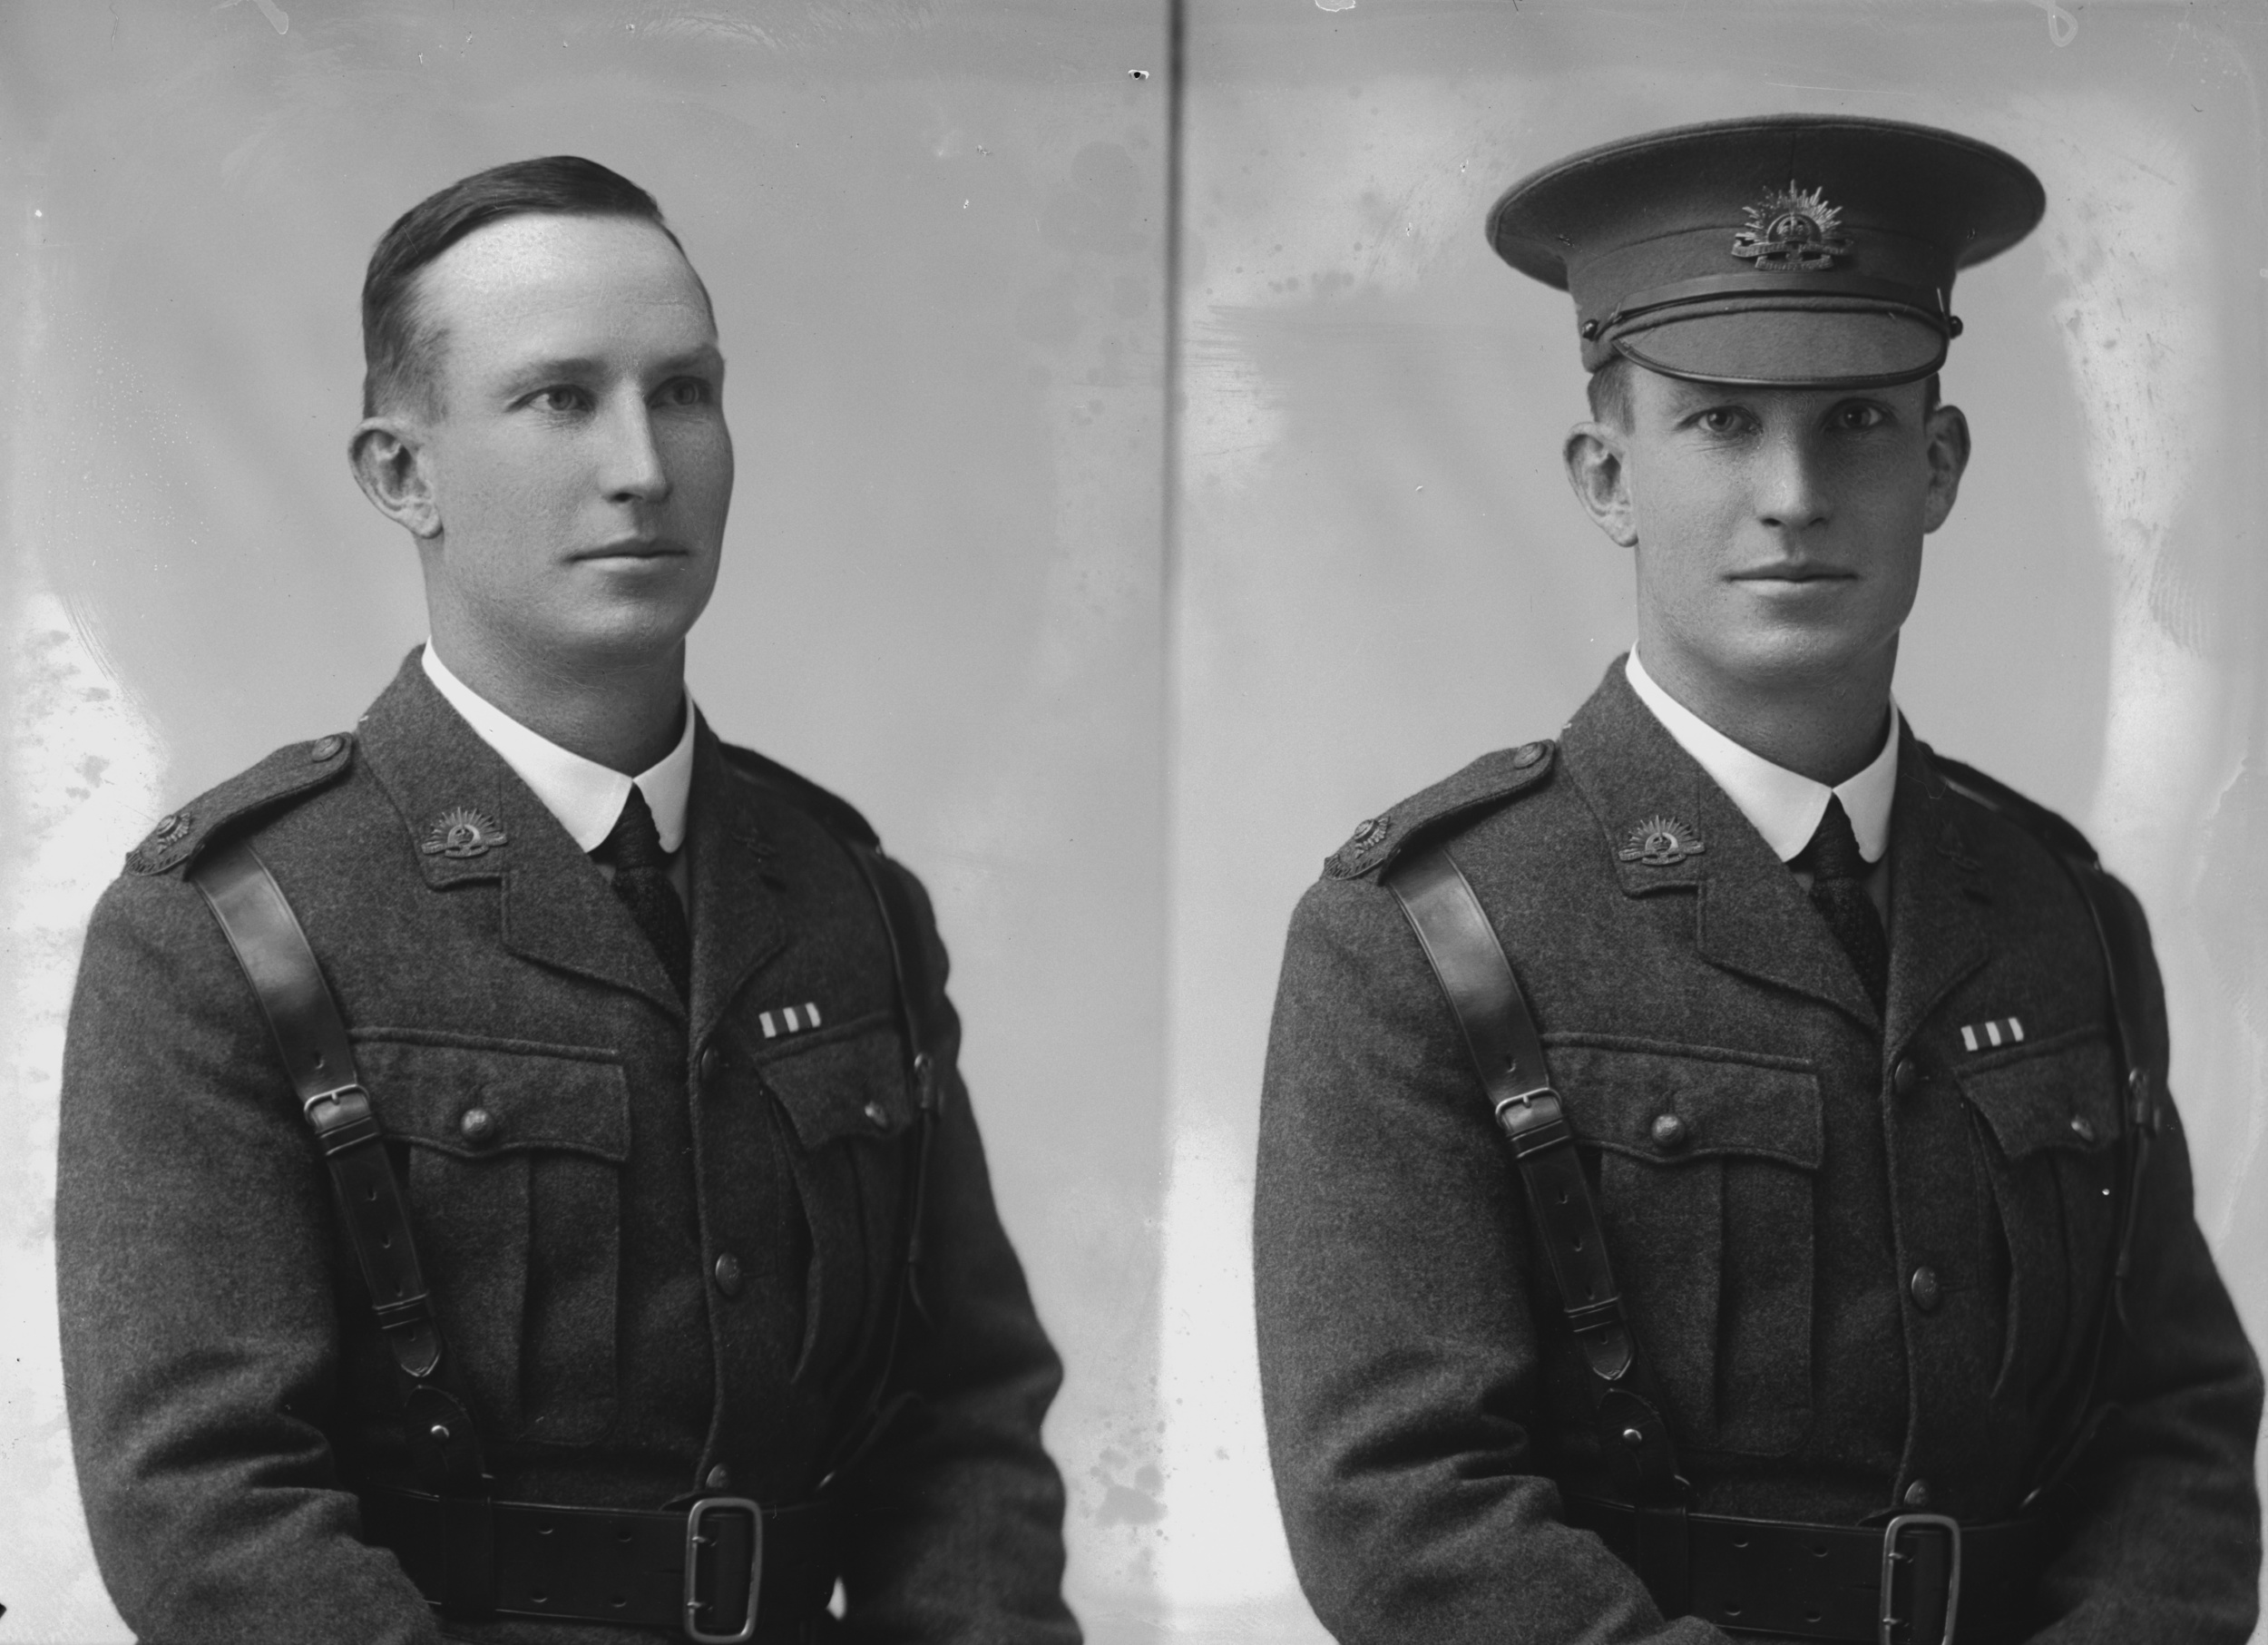 Photographed at the Dease Studio, 117 Barrack Street Perth WA Image courtesy of the State Library of Western Australia: 108012PD